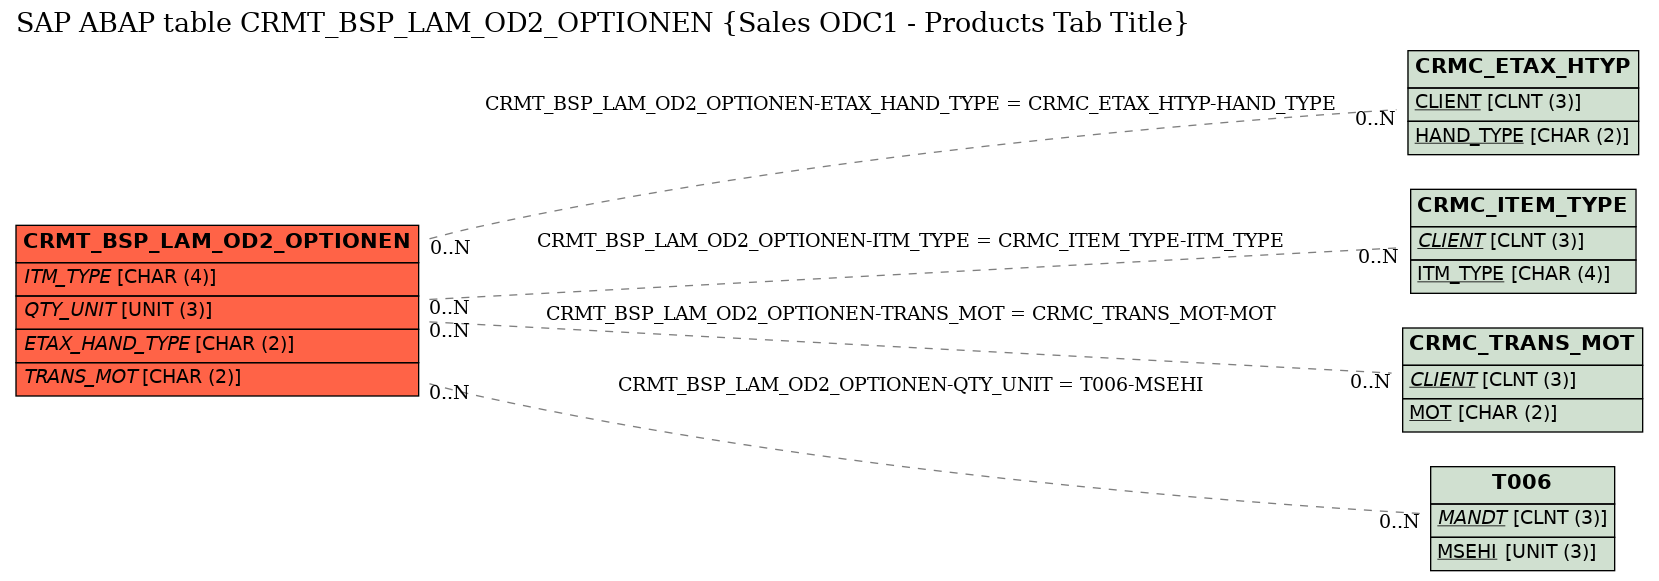 E-R Diagram for table CRMT_BSP_LAM_OD2_OPTIONEN (Sales ODC1 - Products Tab Title)